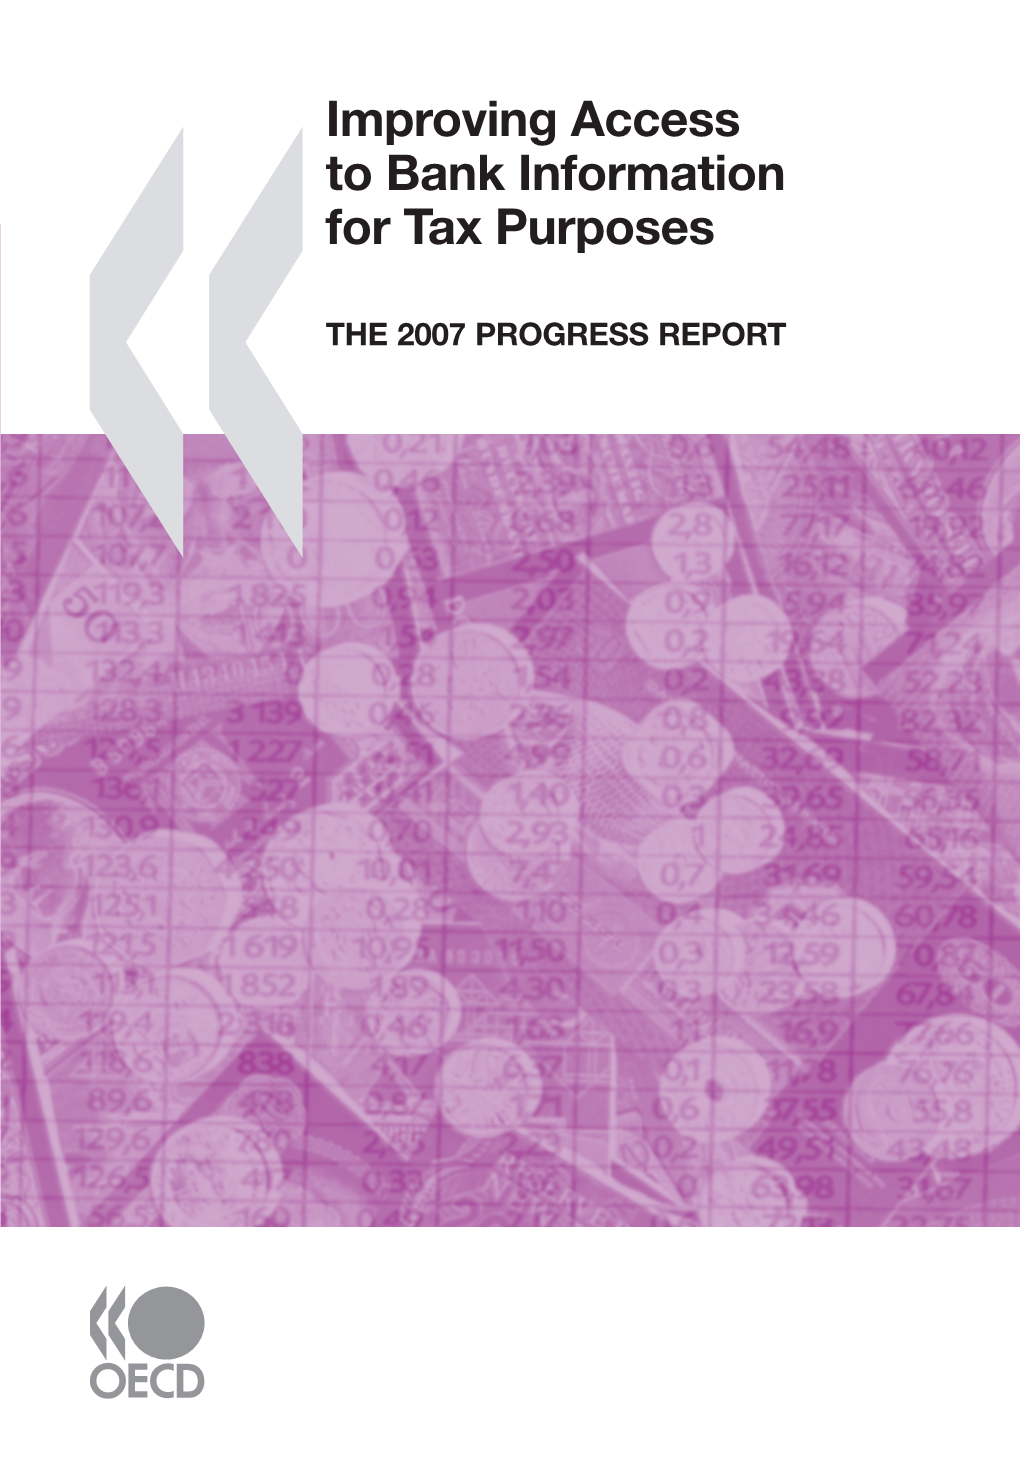 Improving Access to Bank Information for Tax Purposes